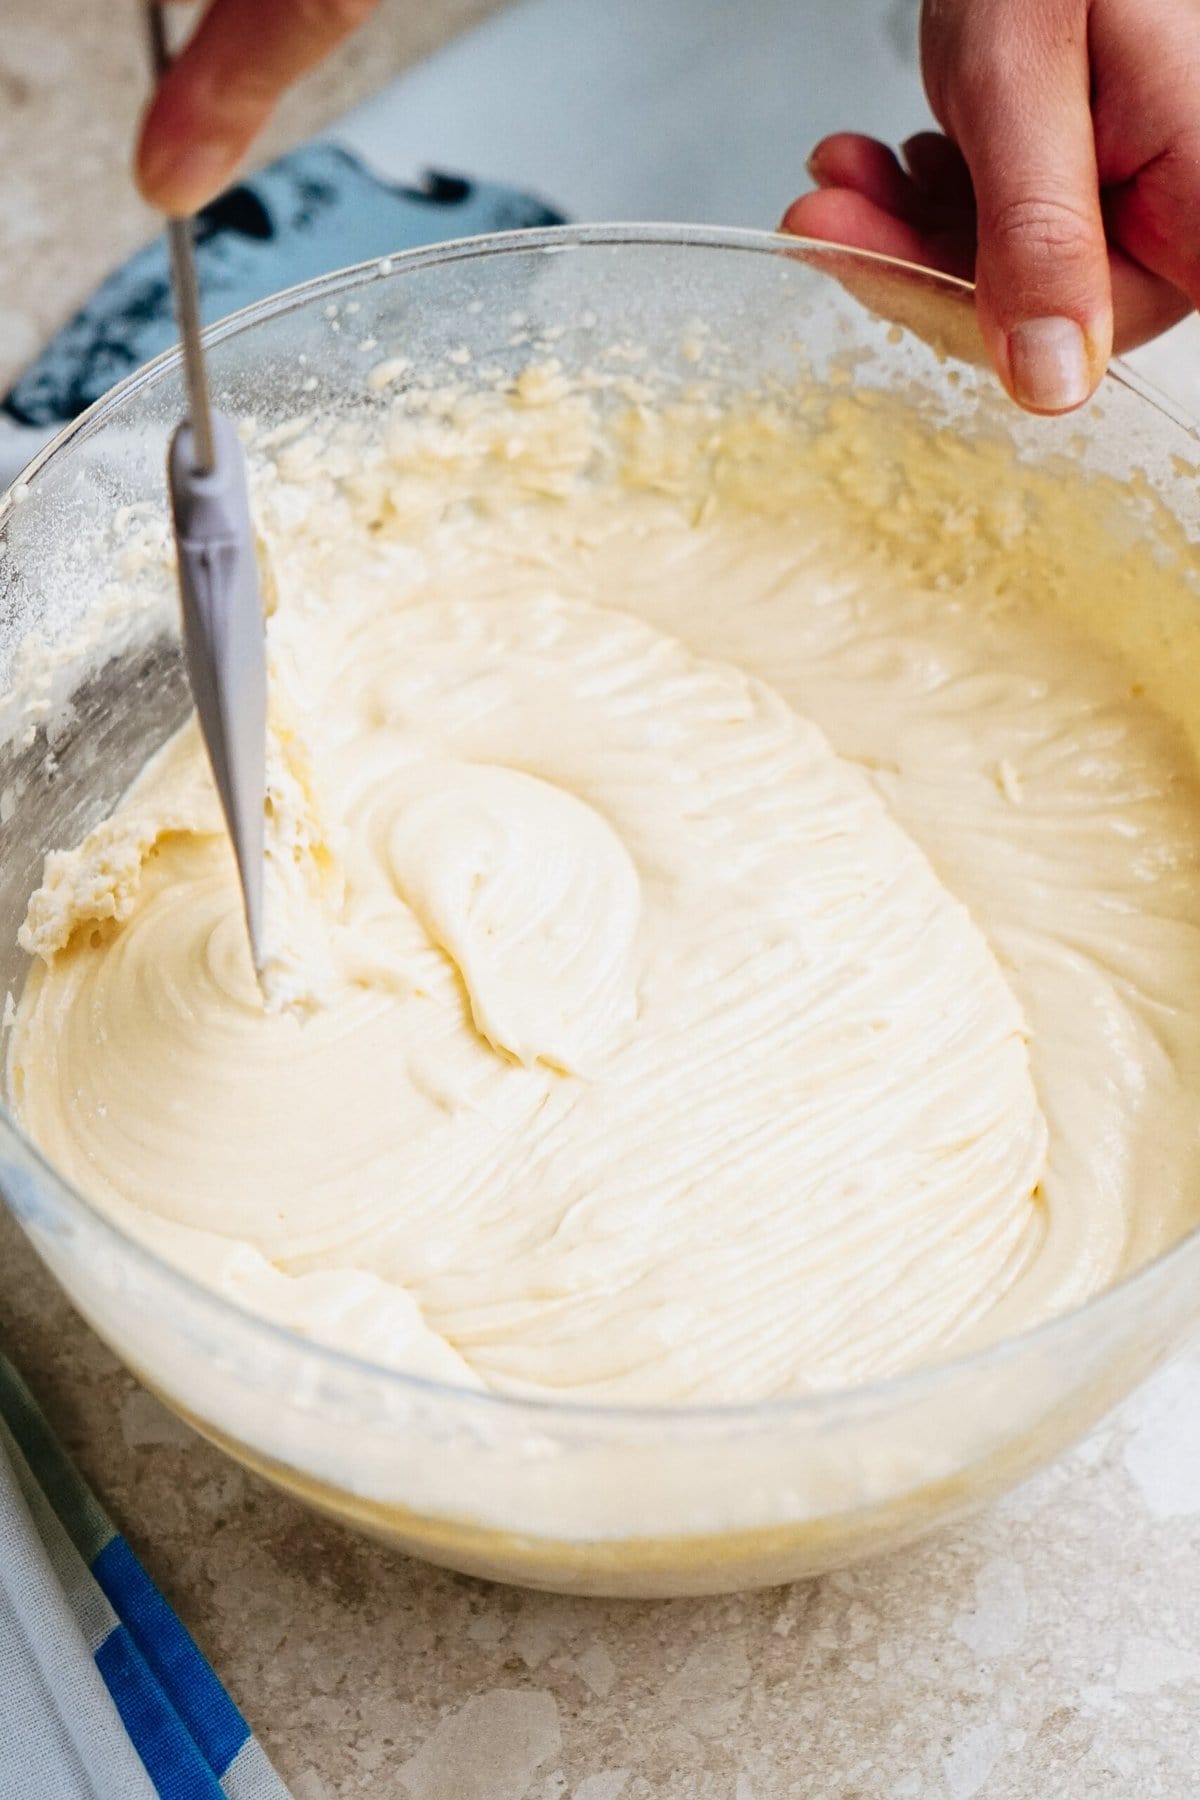 A hand is mixing smooth, creamy batter in a clear glass bowl with a metal whisk on a light-colored surface.